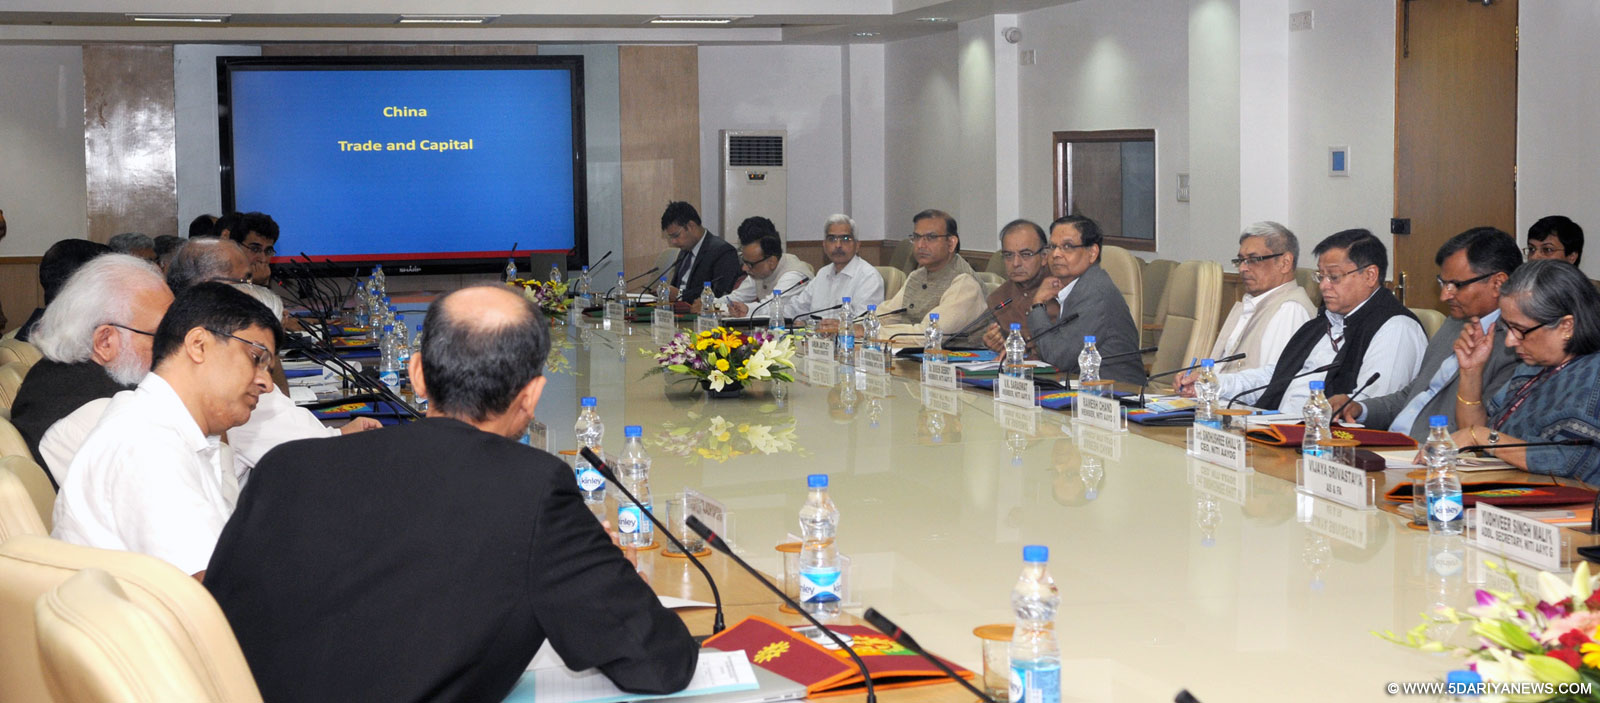 The Union Minister for Finance, Corporate Affairs and Information & Broadcasting, Shri Arun Jaitley chairing the brain storming meeting on budget 2016-17 with economists, at NITI Aayog, in New Delhi on October 19, 2015.